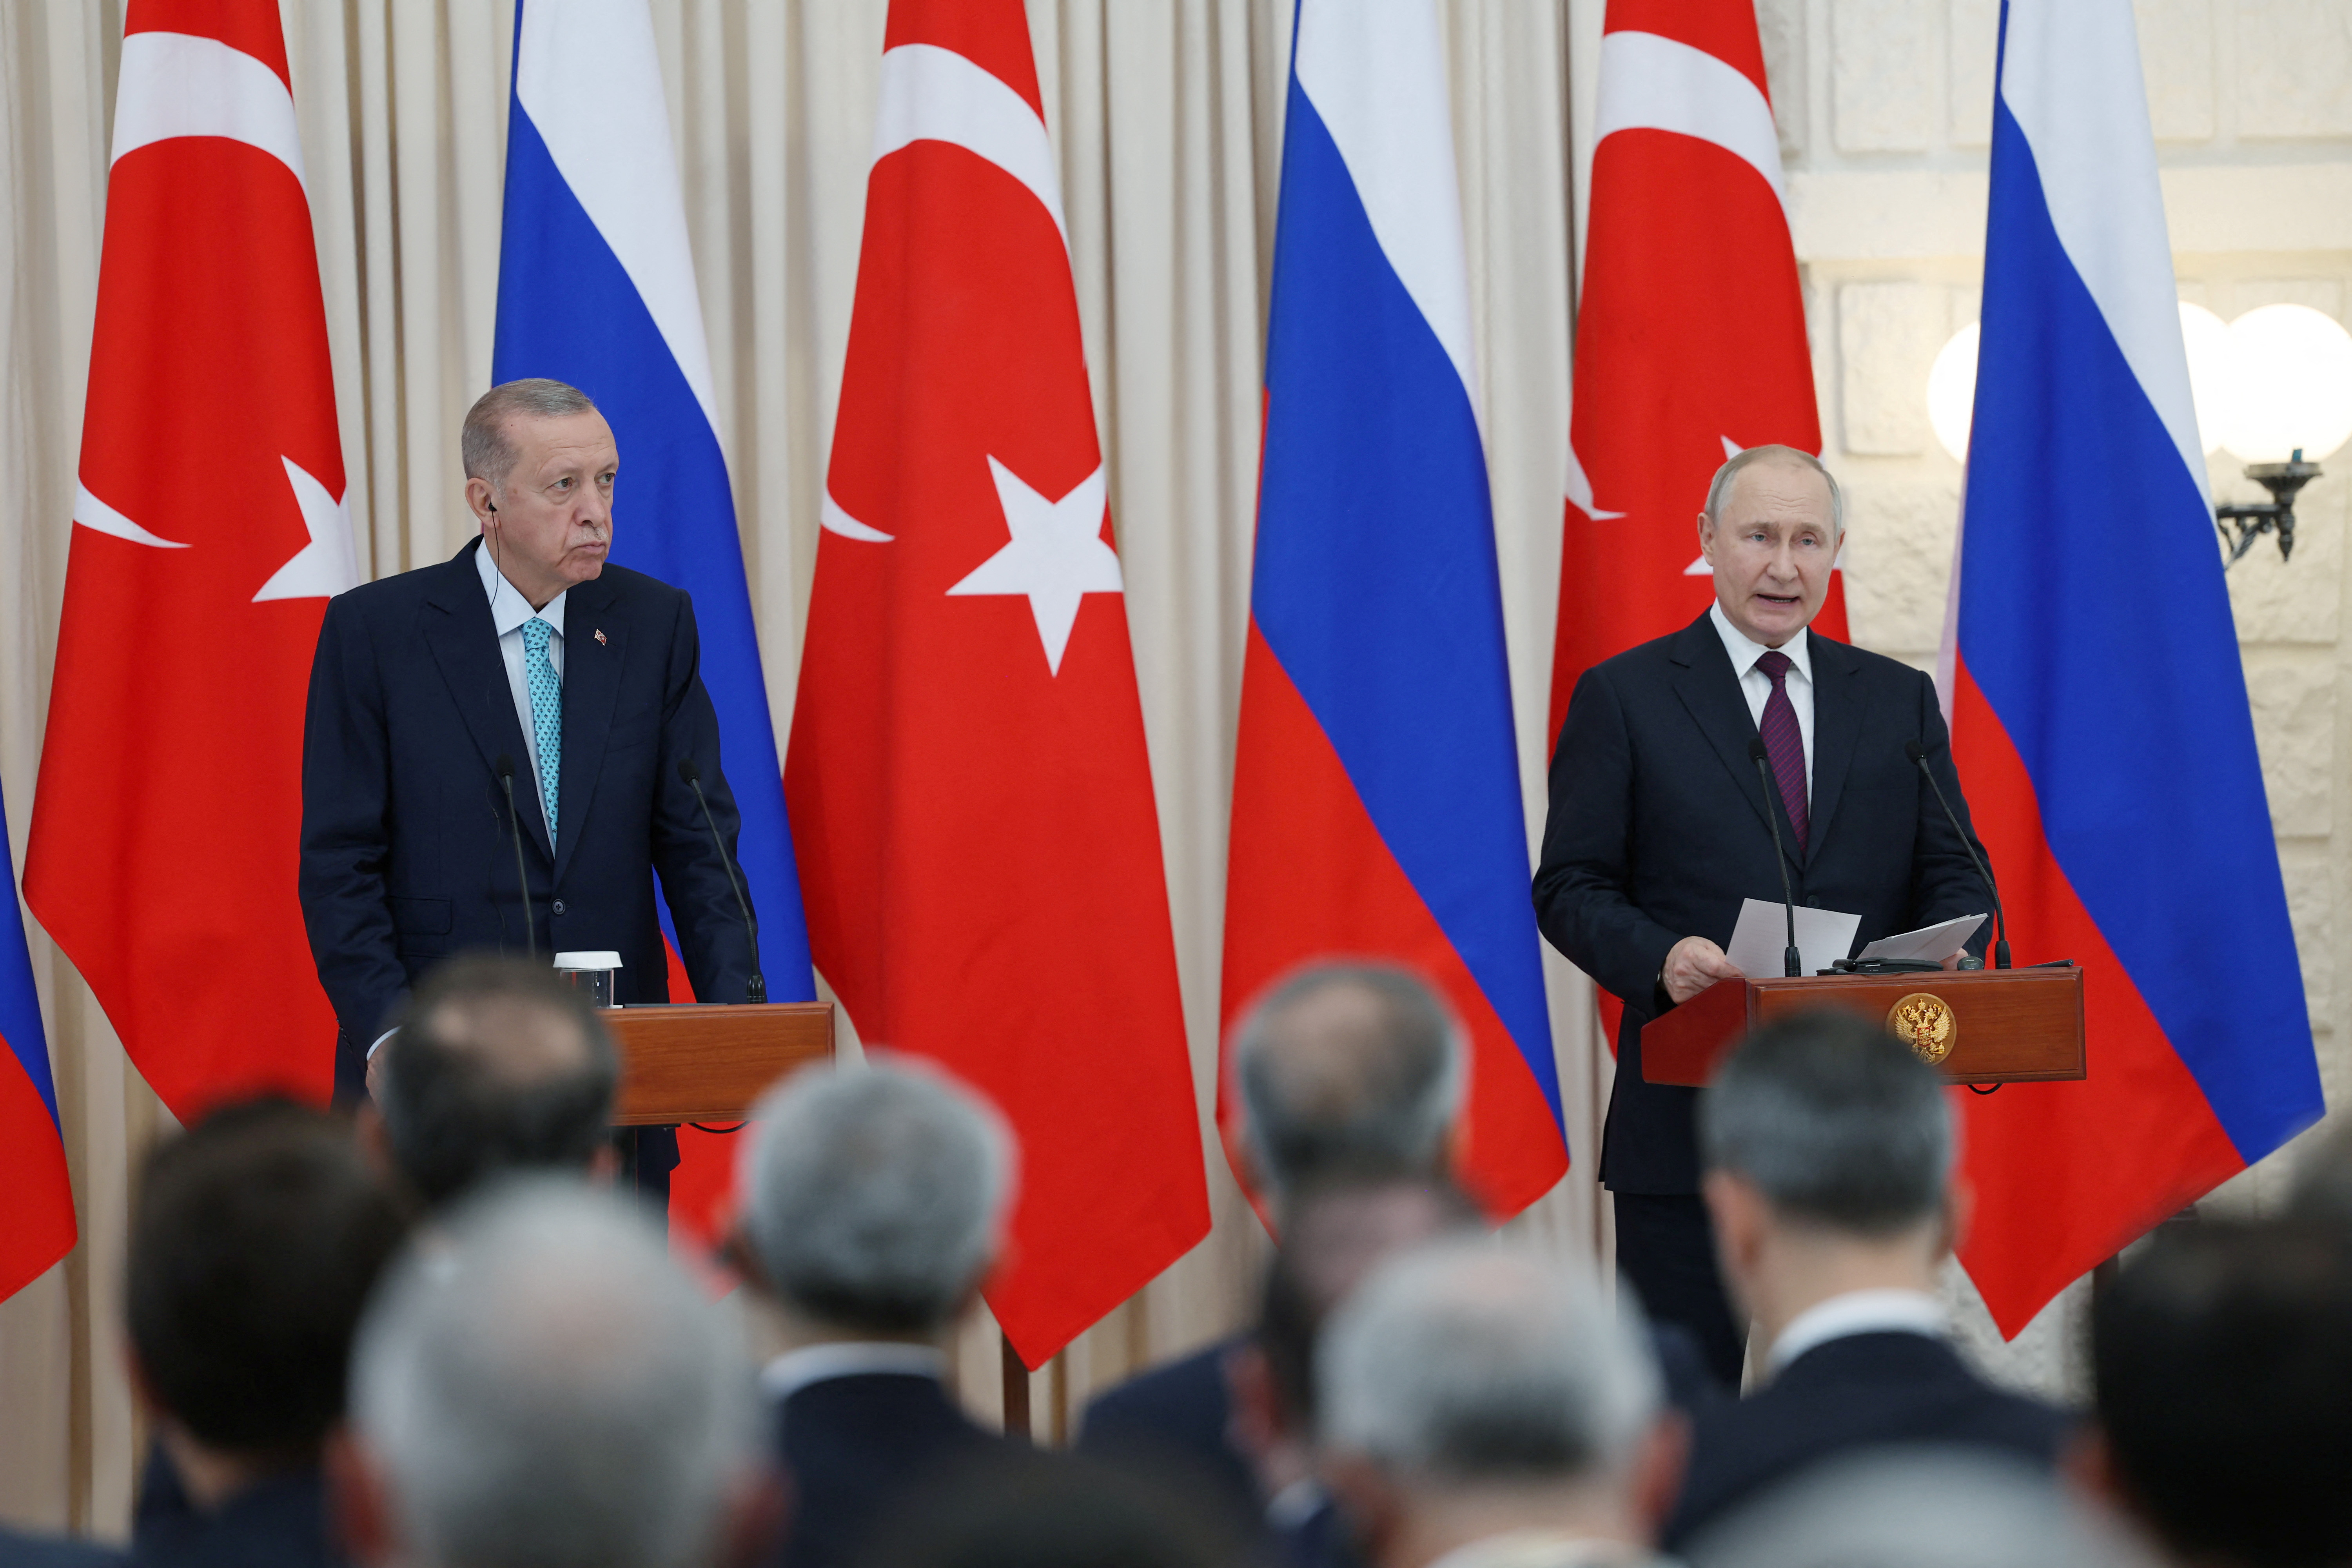 Turkish President Erdogan and his Russian counterpart Putin hold a press conference in Sochi